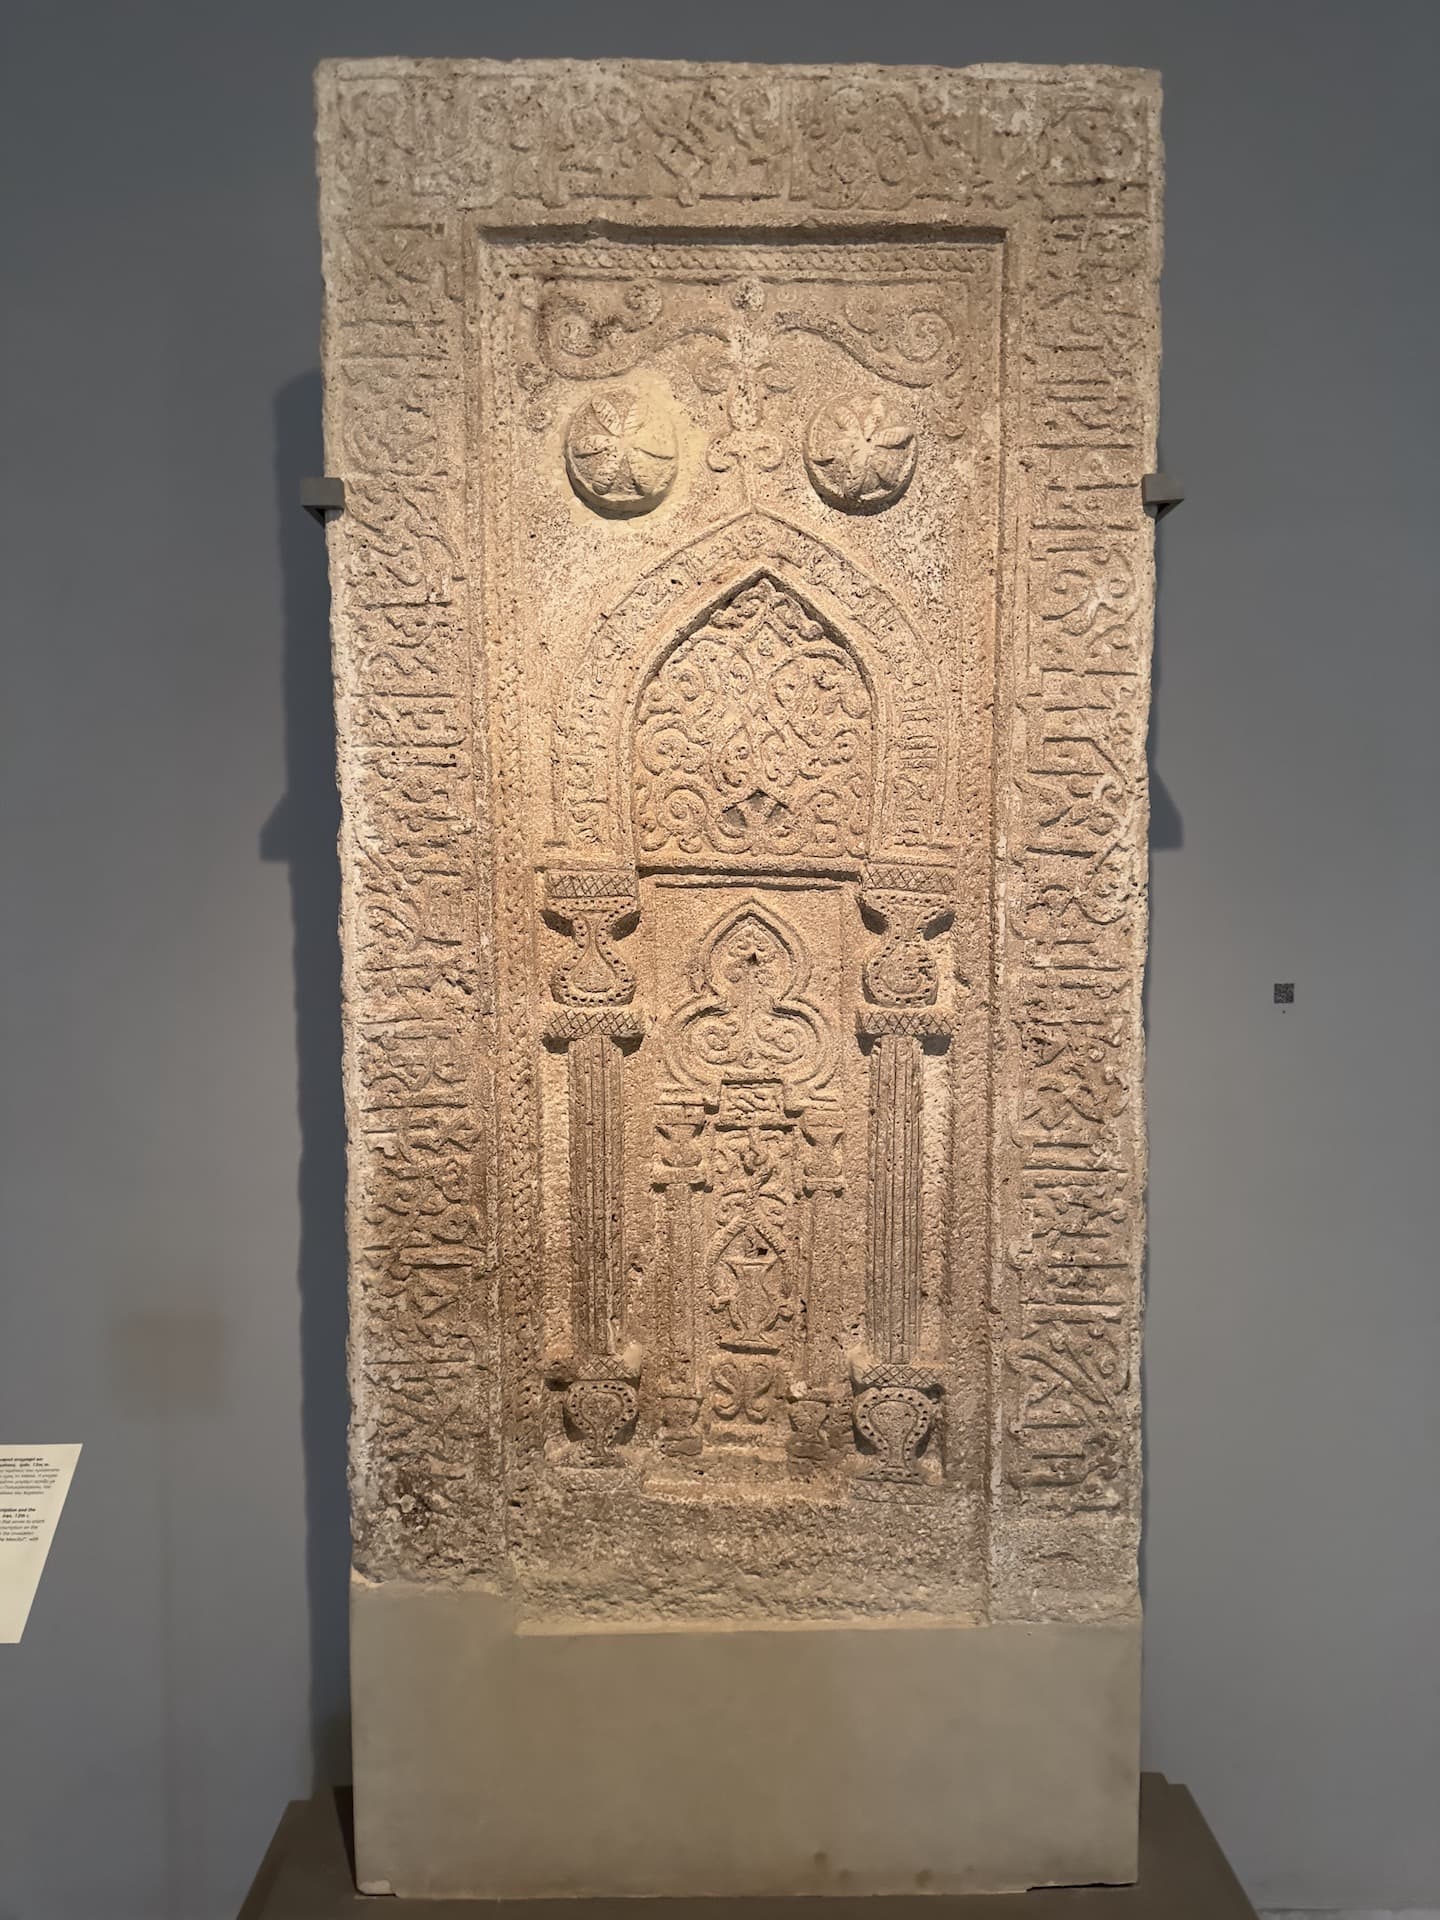 Stone mihrab bearing a floriated Kufic inscription and the representation of a hanging mosque lamp; Iran; 12th century at the Benaki Museum of Islamic Art in Athens, Greece